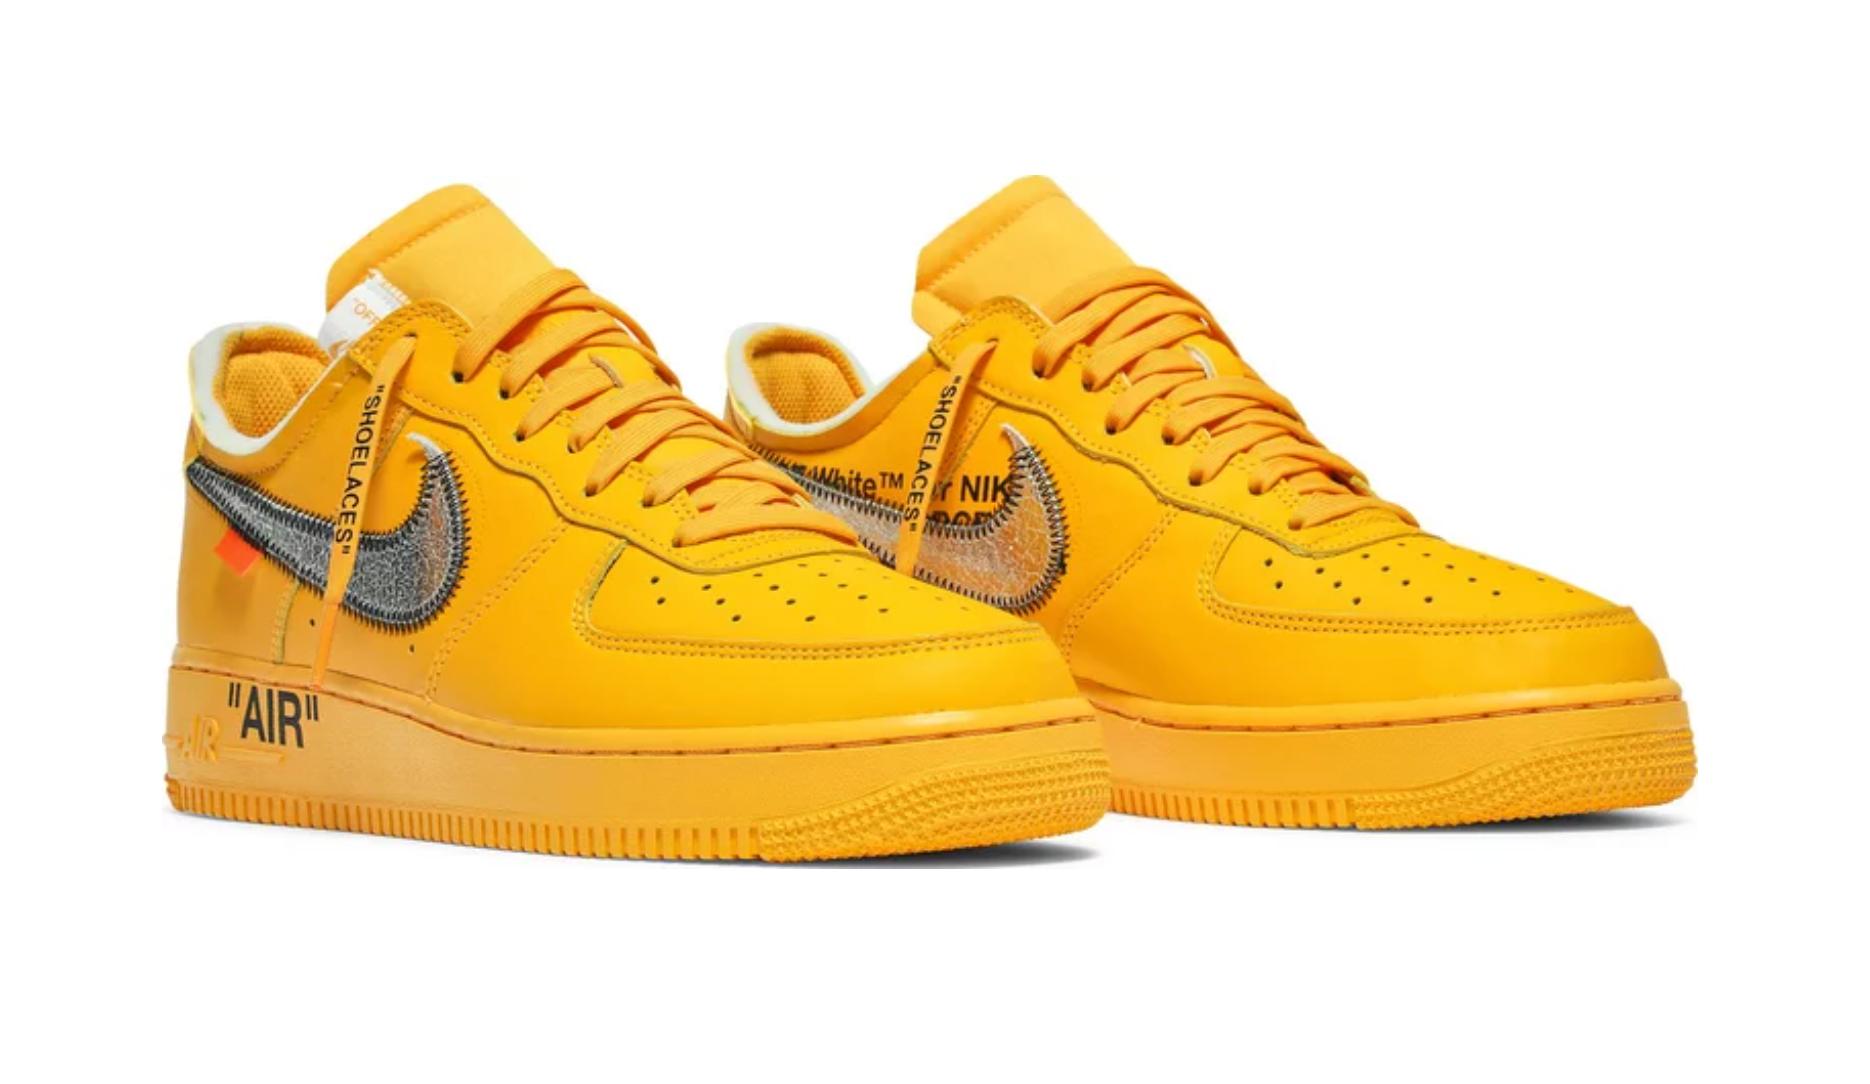 Nike Air Force 1 Low Off-white University Gold Metallic Silver in